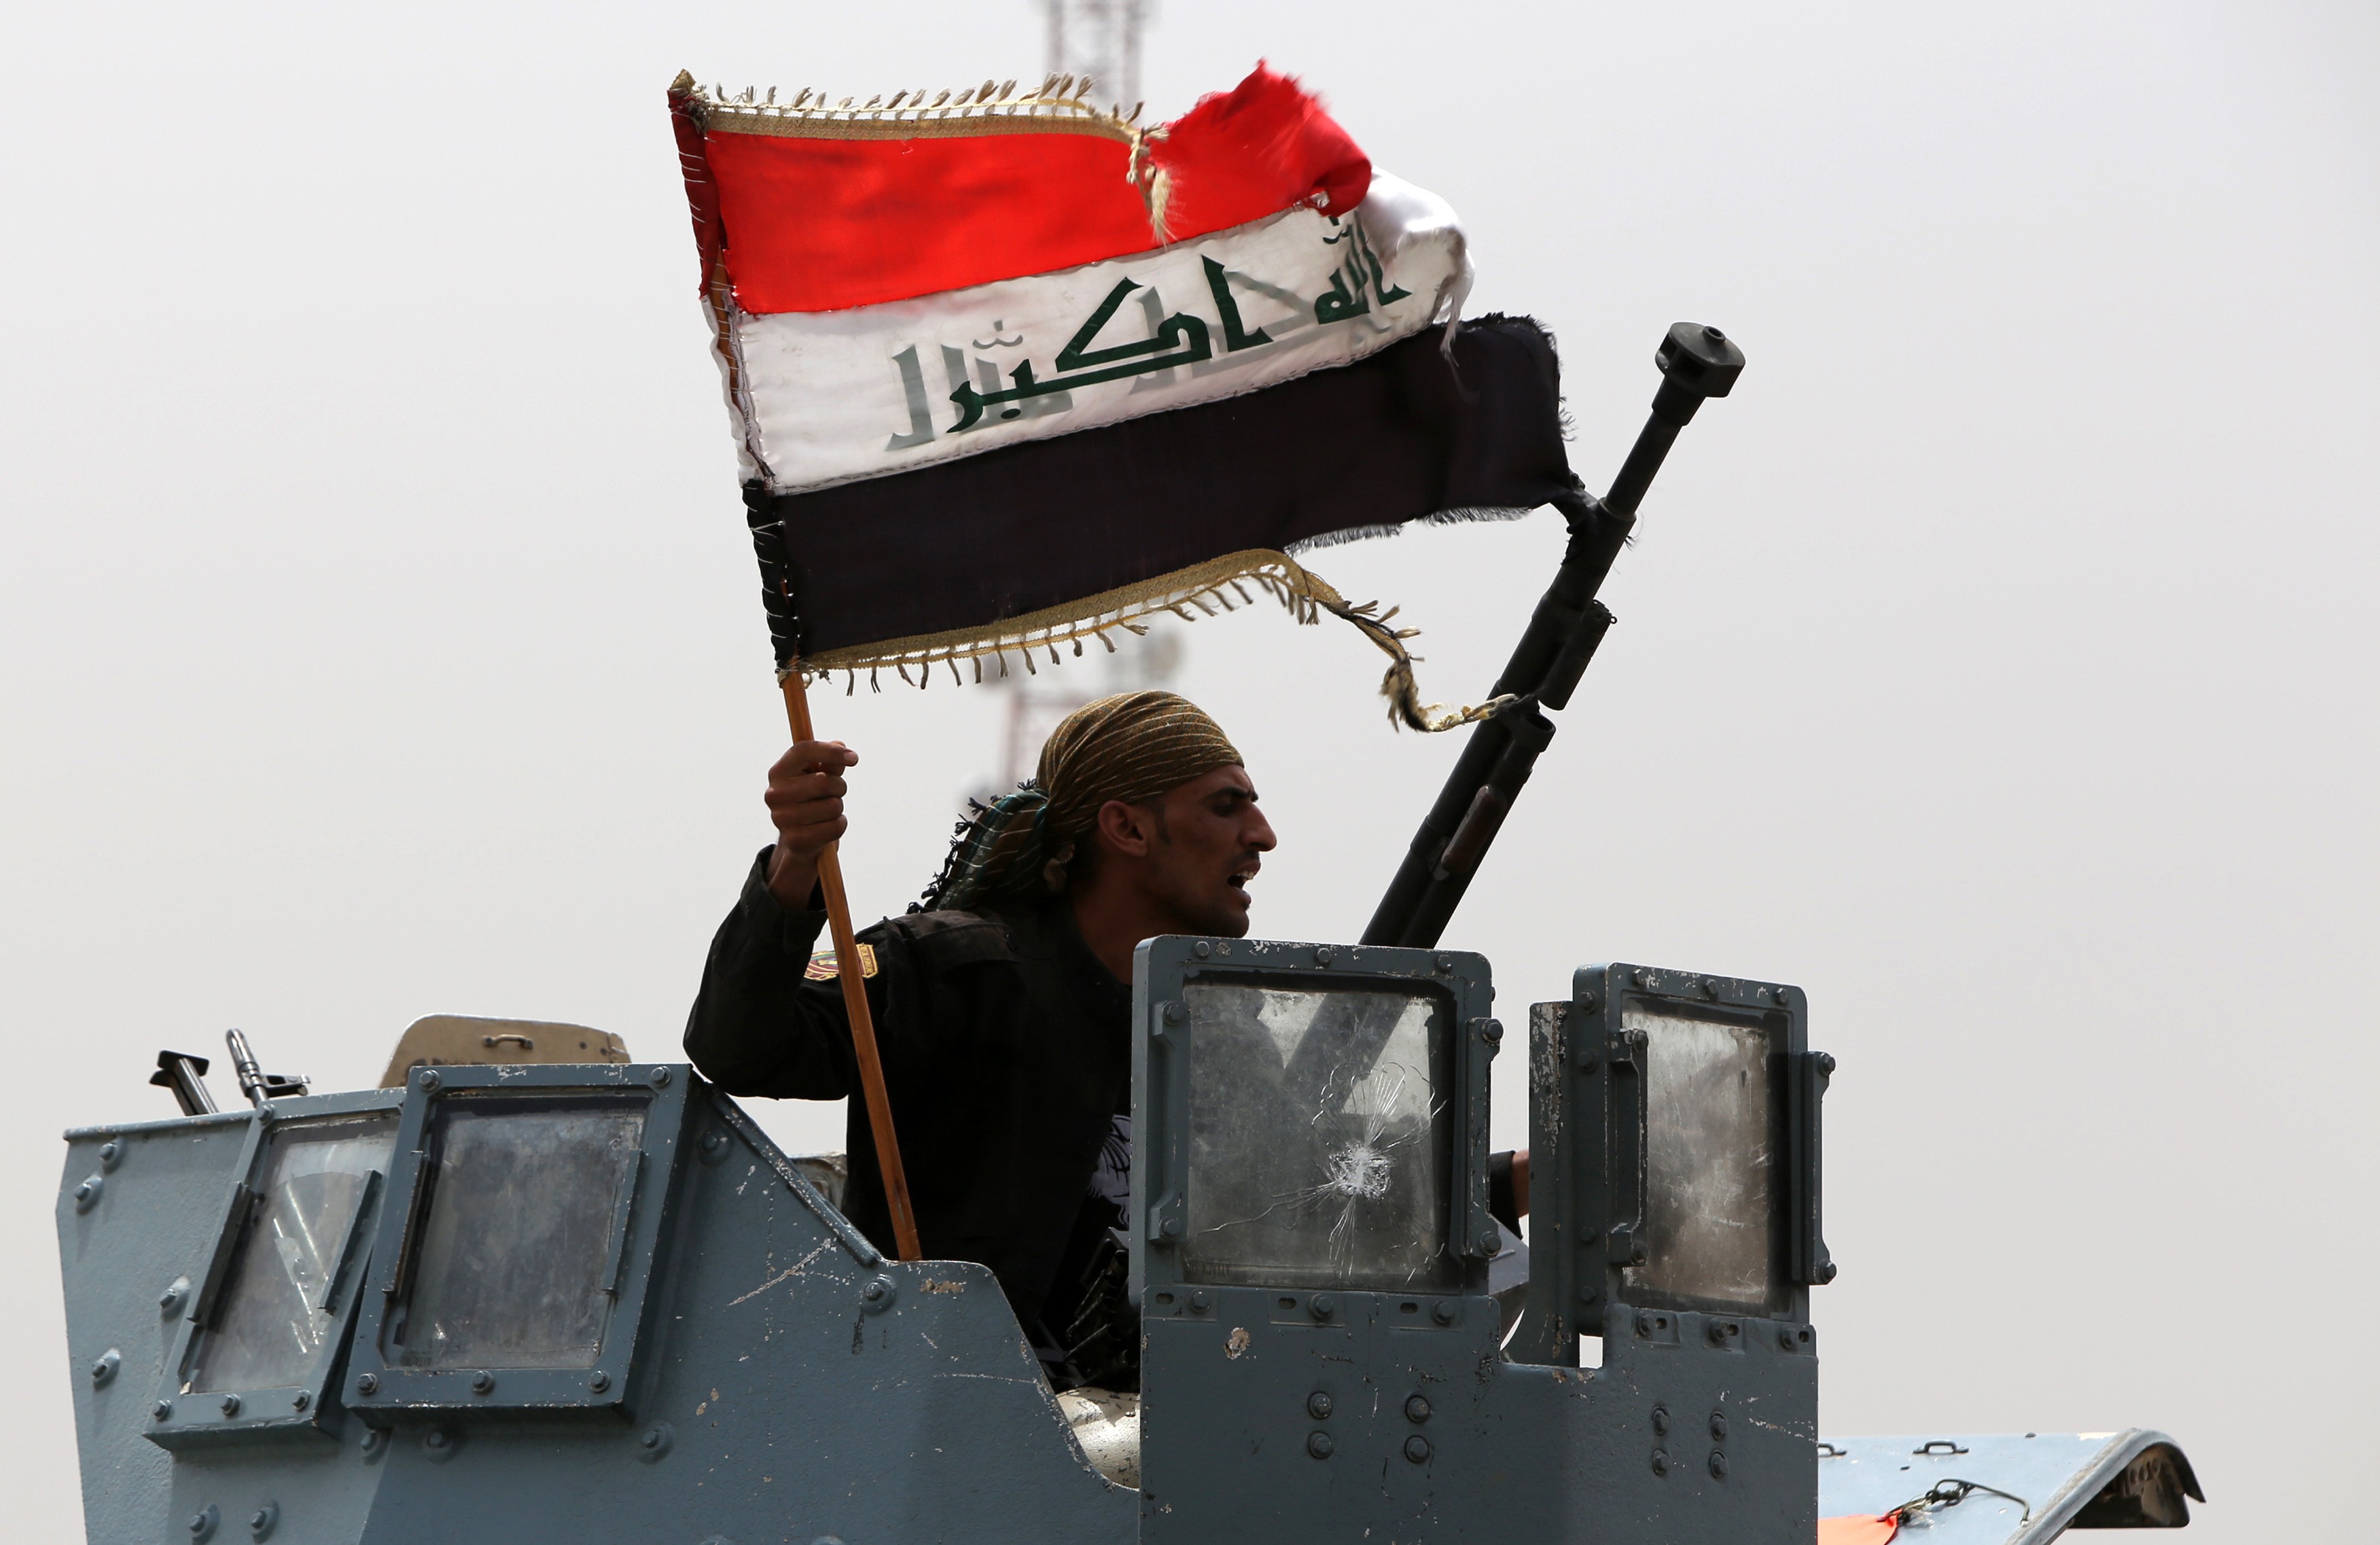 A member of the Iraqi antiterrorism forces waves the national flag in celebration after securing a checkpoint from Sunni militants in the village of Badriyah, west of the Iraqi city of Mosul, on Aug. 19, 2014 (Ahmad Al-Rubaye—AFP/Getty Images)